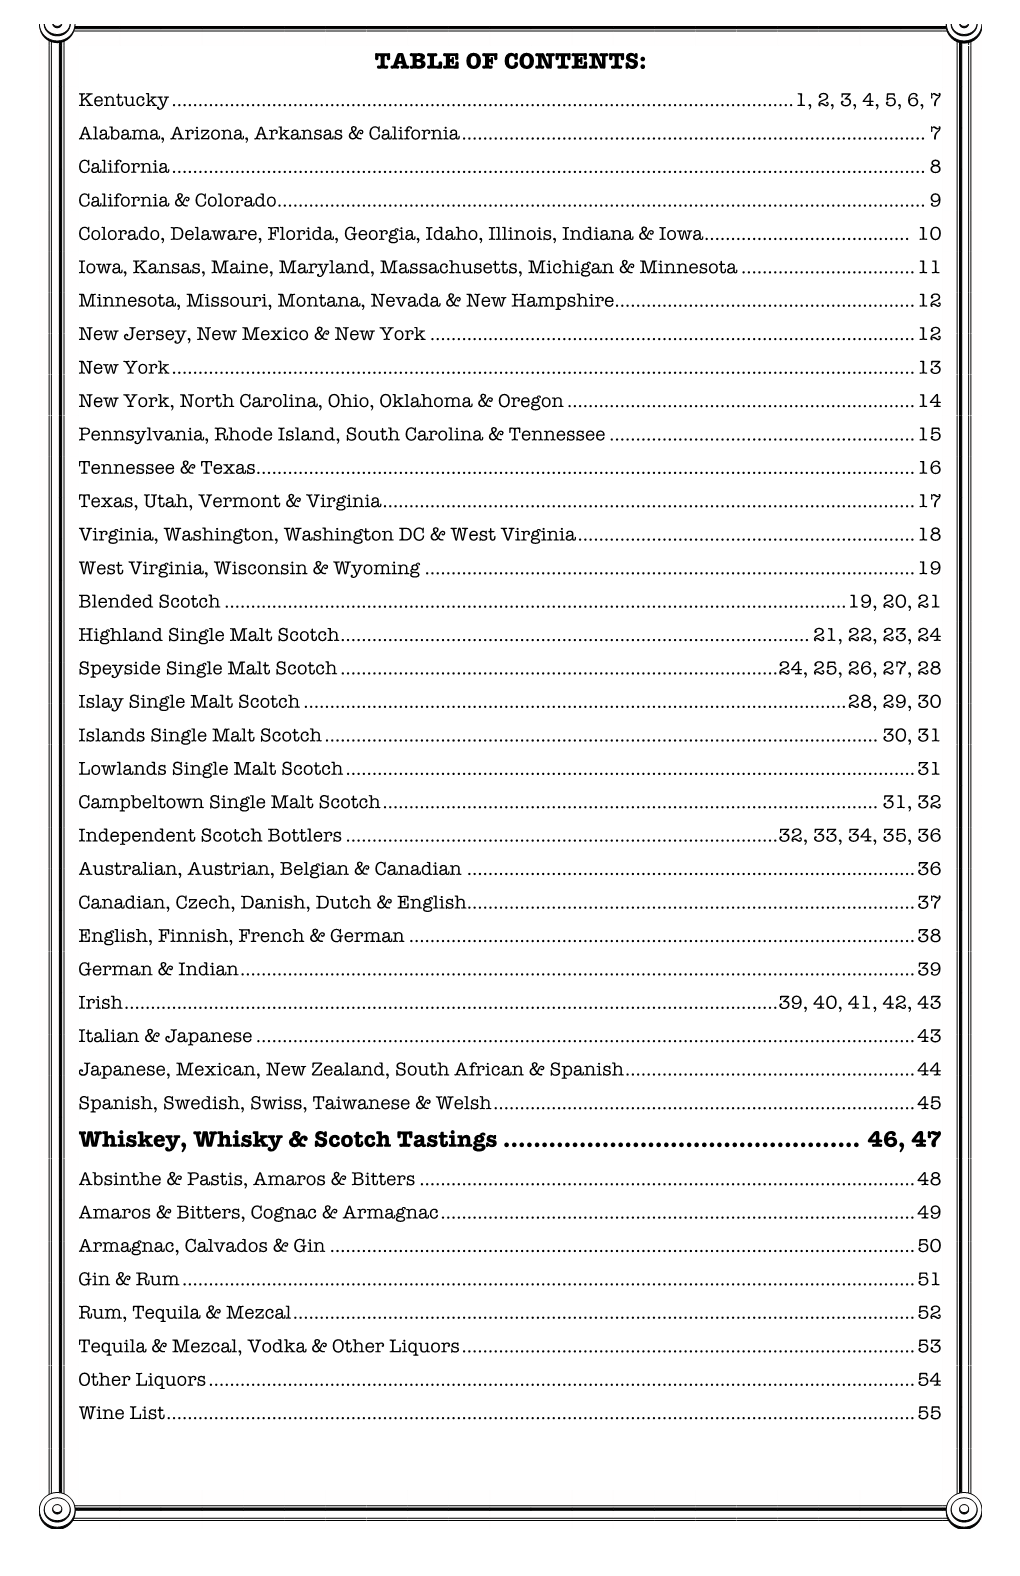 TABLE of CONTENTS: Whiskey, Whisky & Scotch Tastings